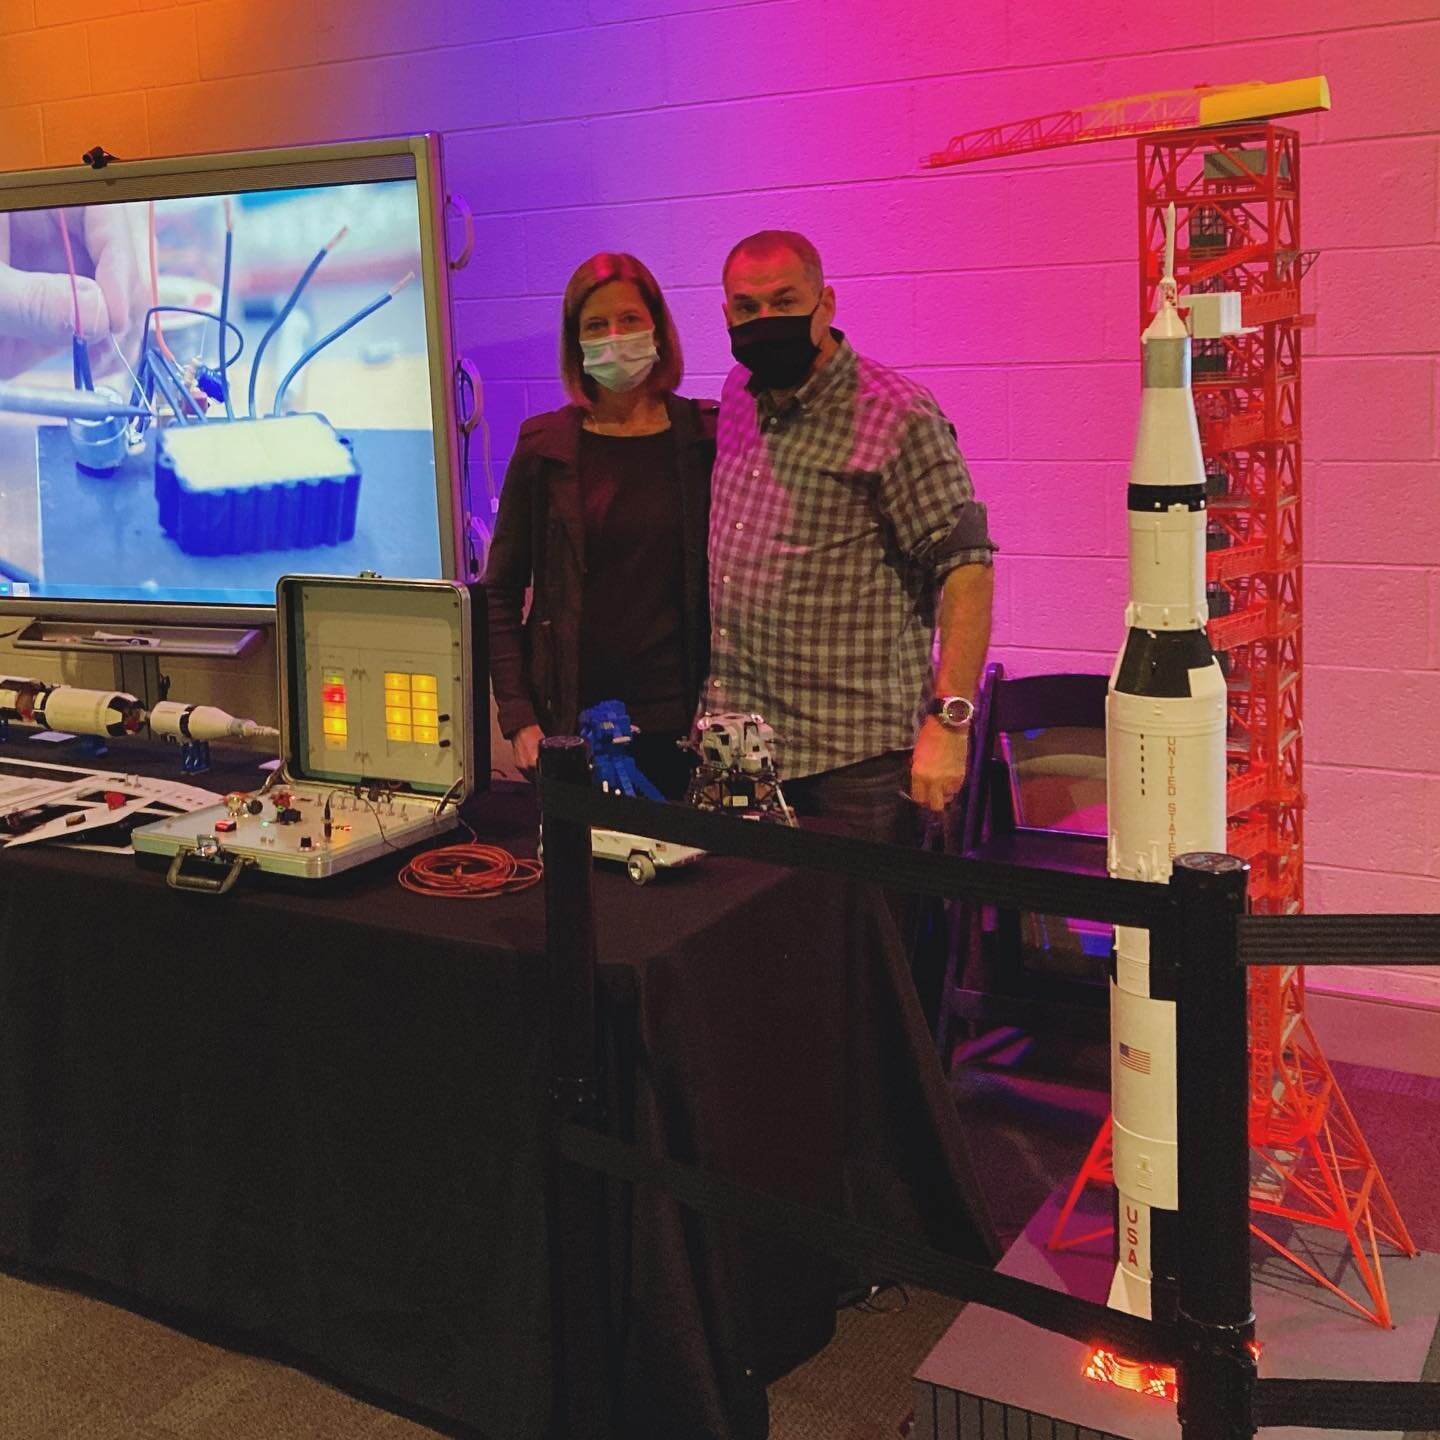 Ruth and I are back @discoveryplacescience in Charlotte NC this weekend, to share and demo our Apollo projects. Come see us! Our latest video, of the Apollo - When We Went to the Moon exhibit here at Discovery Place, is on our YouTube channel. Link i